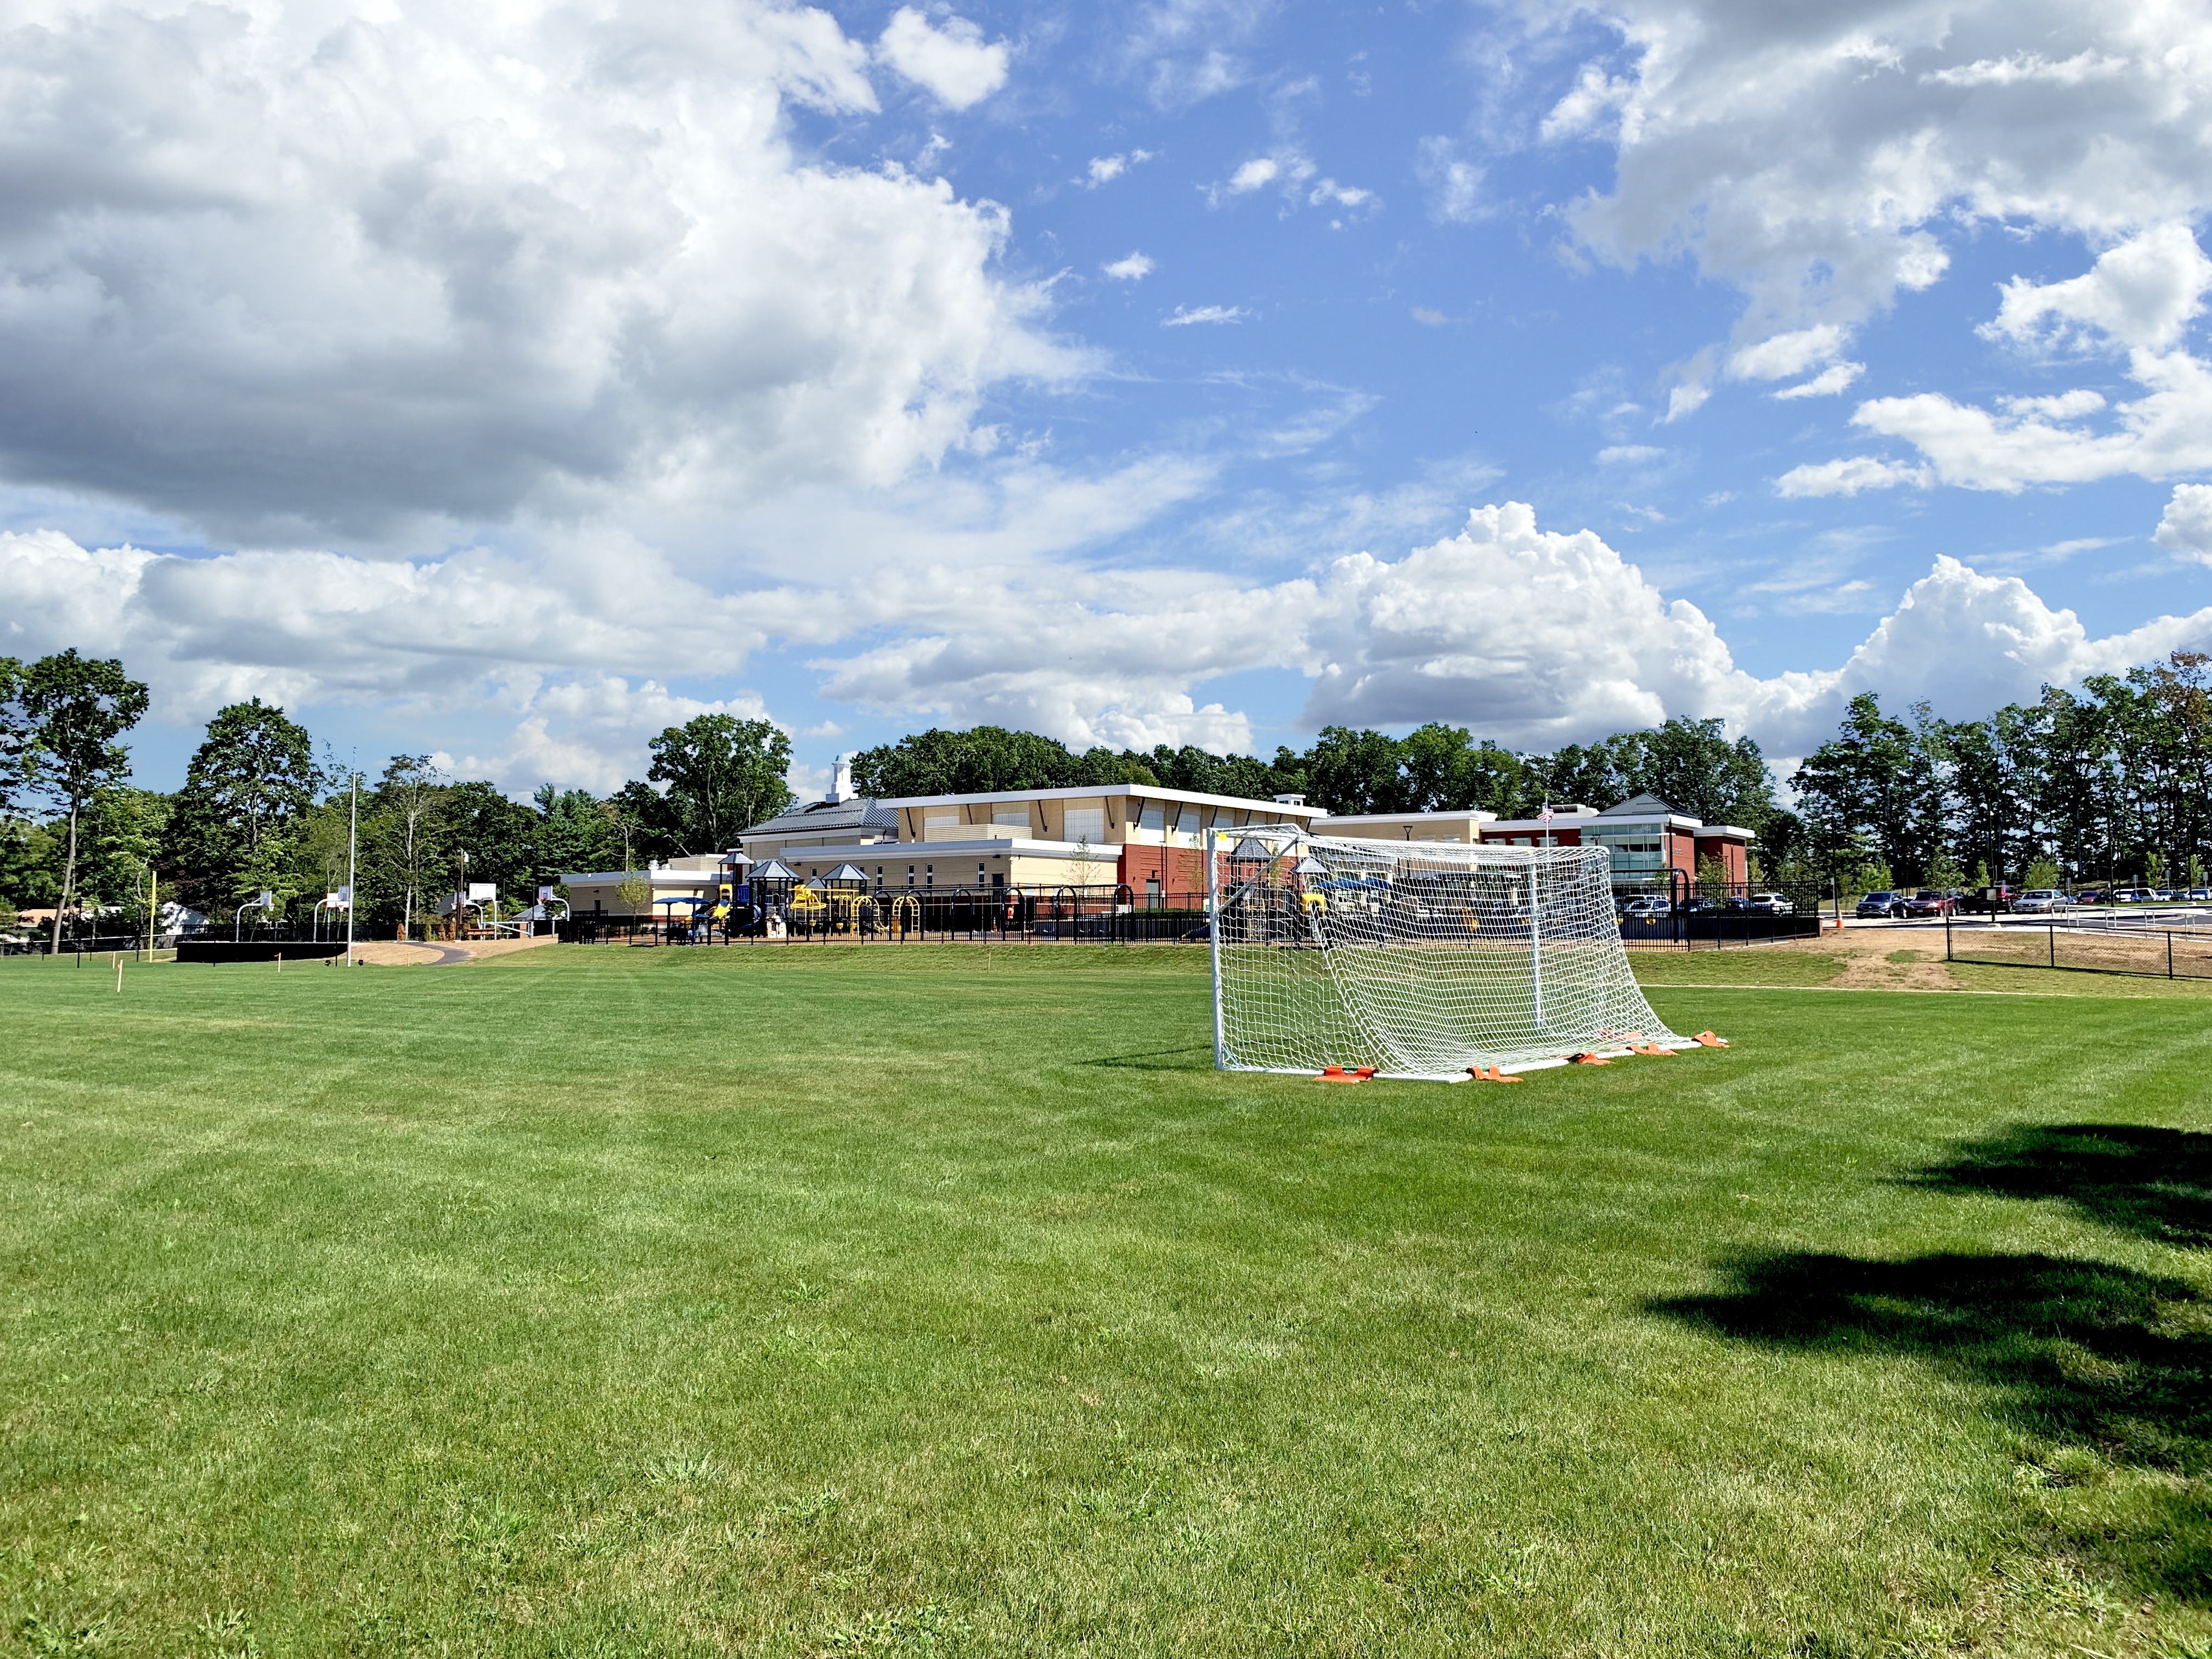 08 Moser School Playground Soccer Field HIGH RES